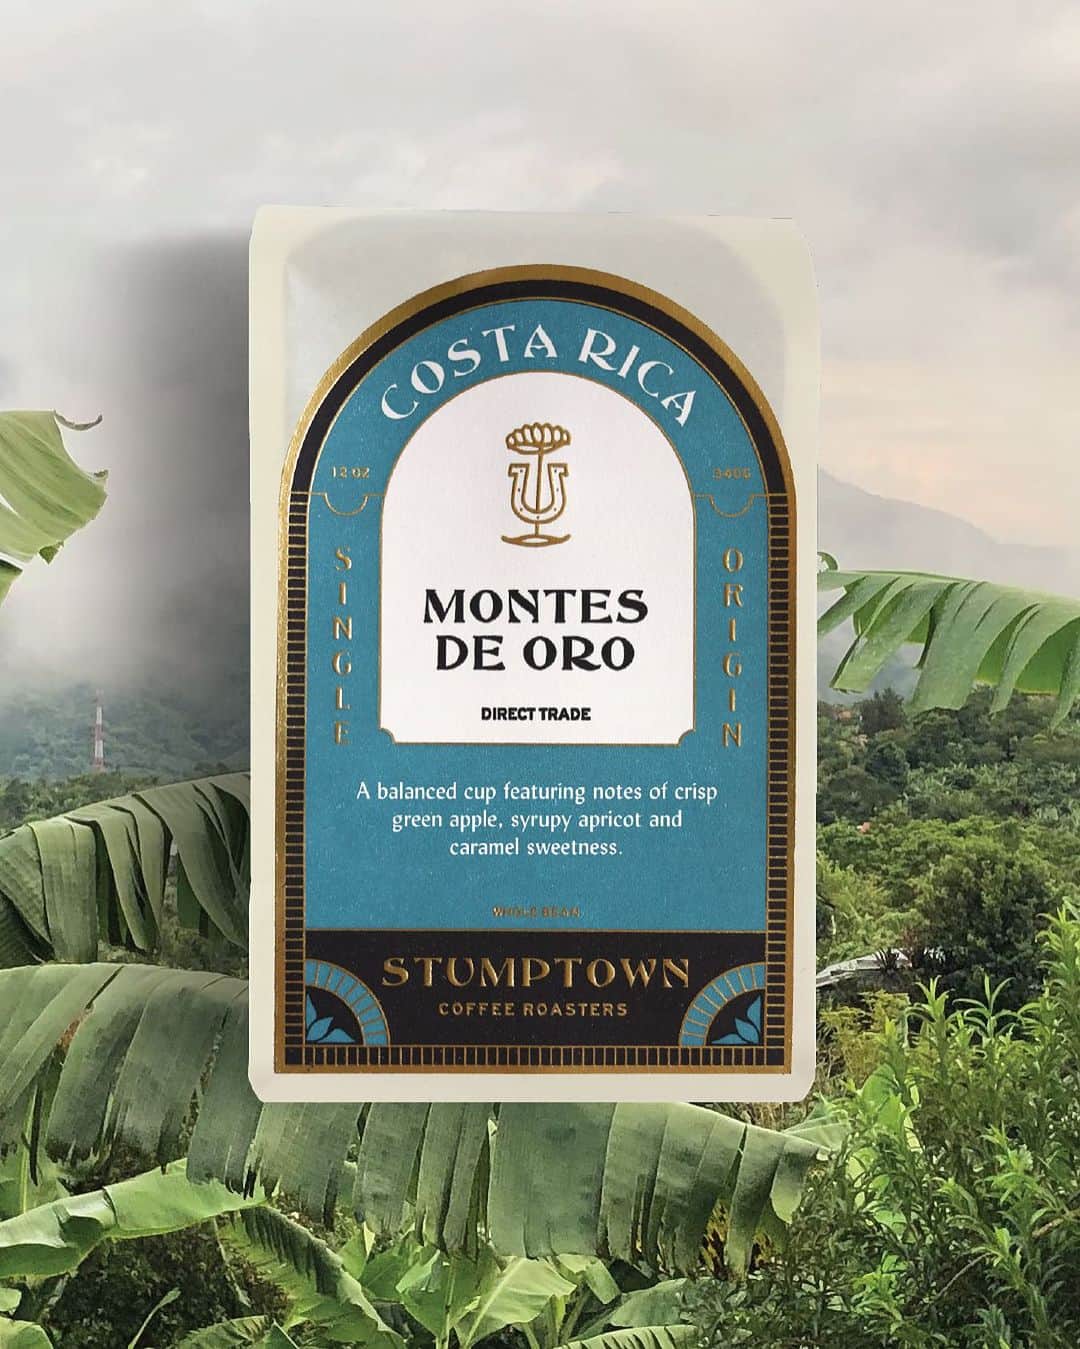 Stumptown Coffee Roastersのインスタグラム：「Located in Costa Rica's mountainous and lush Tarrazú region, Montes de Oro translates to Mountains of Gold, and when you take that first sip, you'll know why the name is so fitting. Every cup is rich in consistency, complexity, and flavor—with notes of crisp green apple, syrupy apricot, and caramel sweetness. 🍏✨   To say that we get excited when Montes de Oro returns to the menu would be an understatement. This impeccable coffee represents one of our longest-standing Direct Trade relationships dating back to 2006 when we became the Gamboa family's first customer. 🤝❤️」